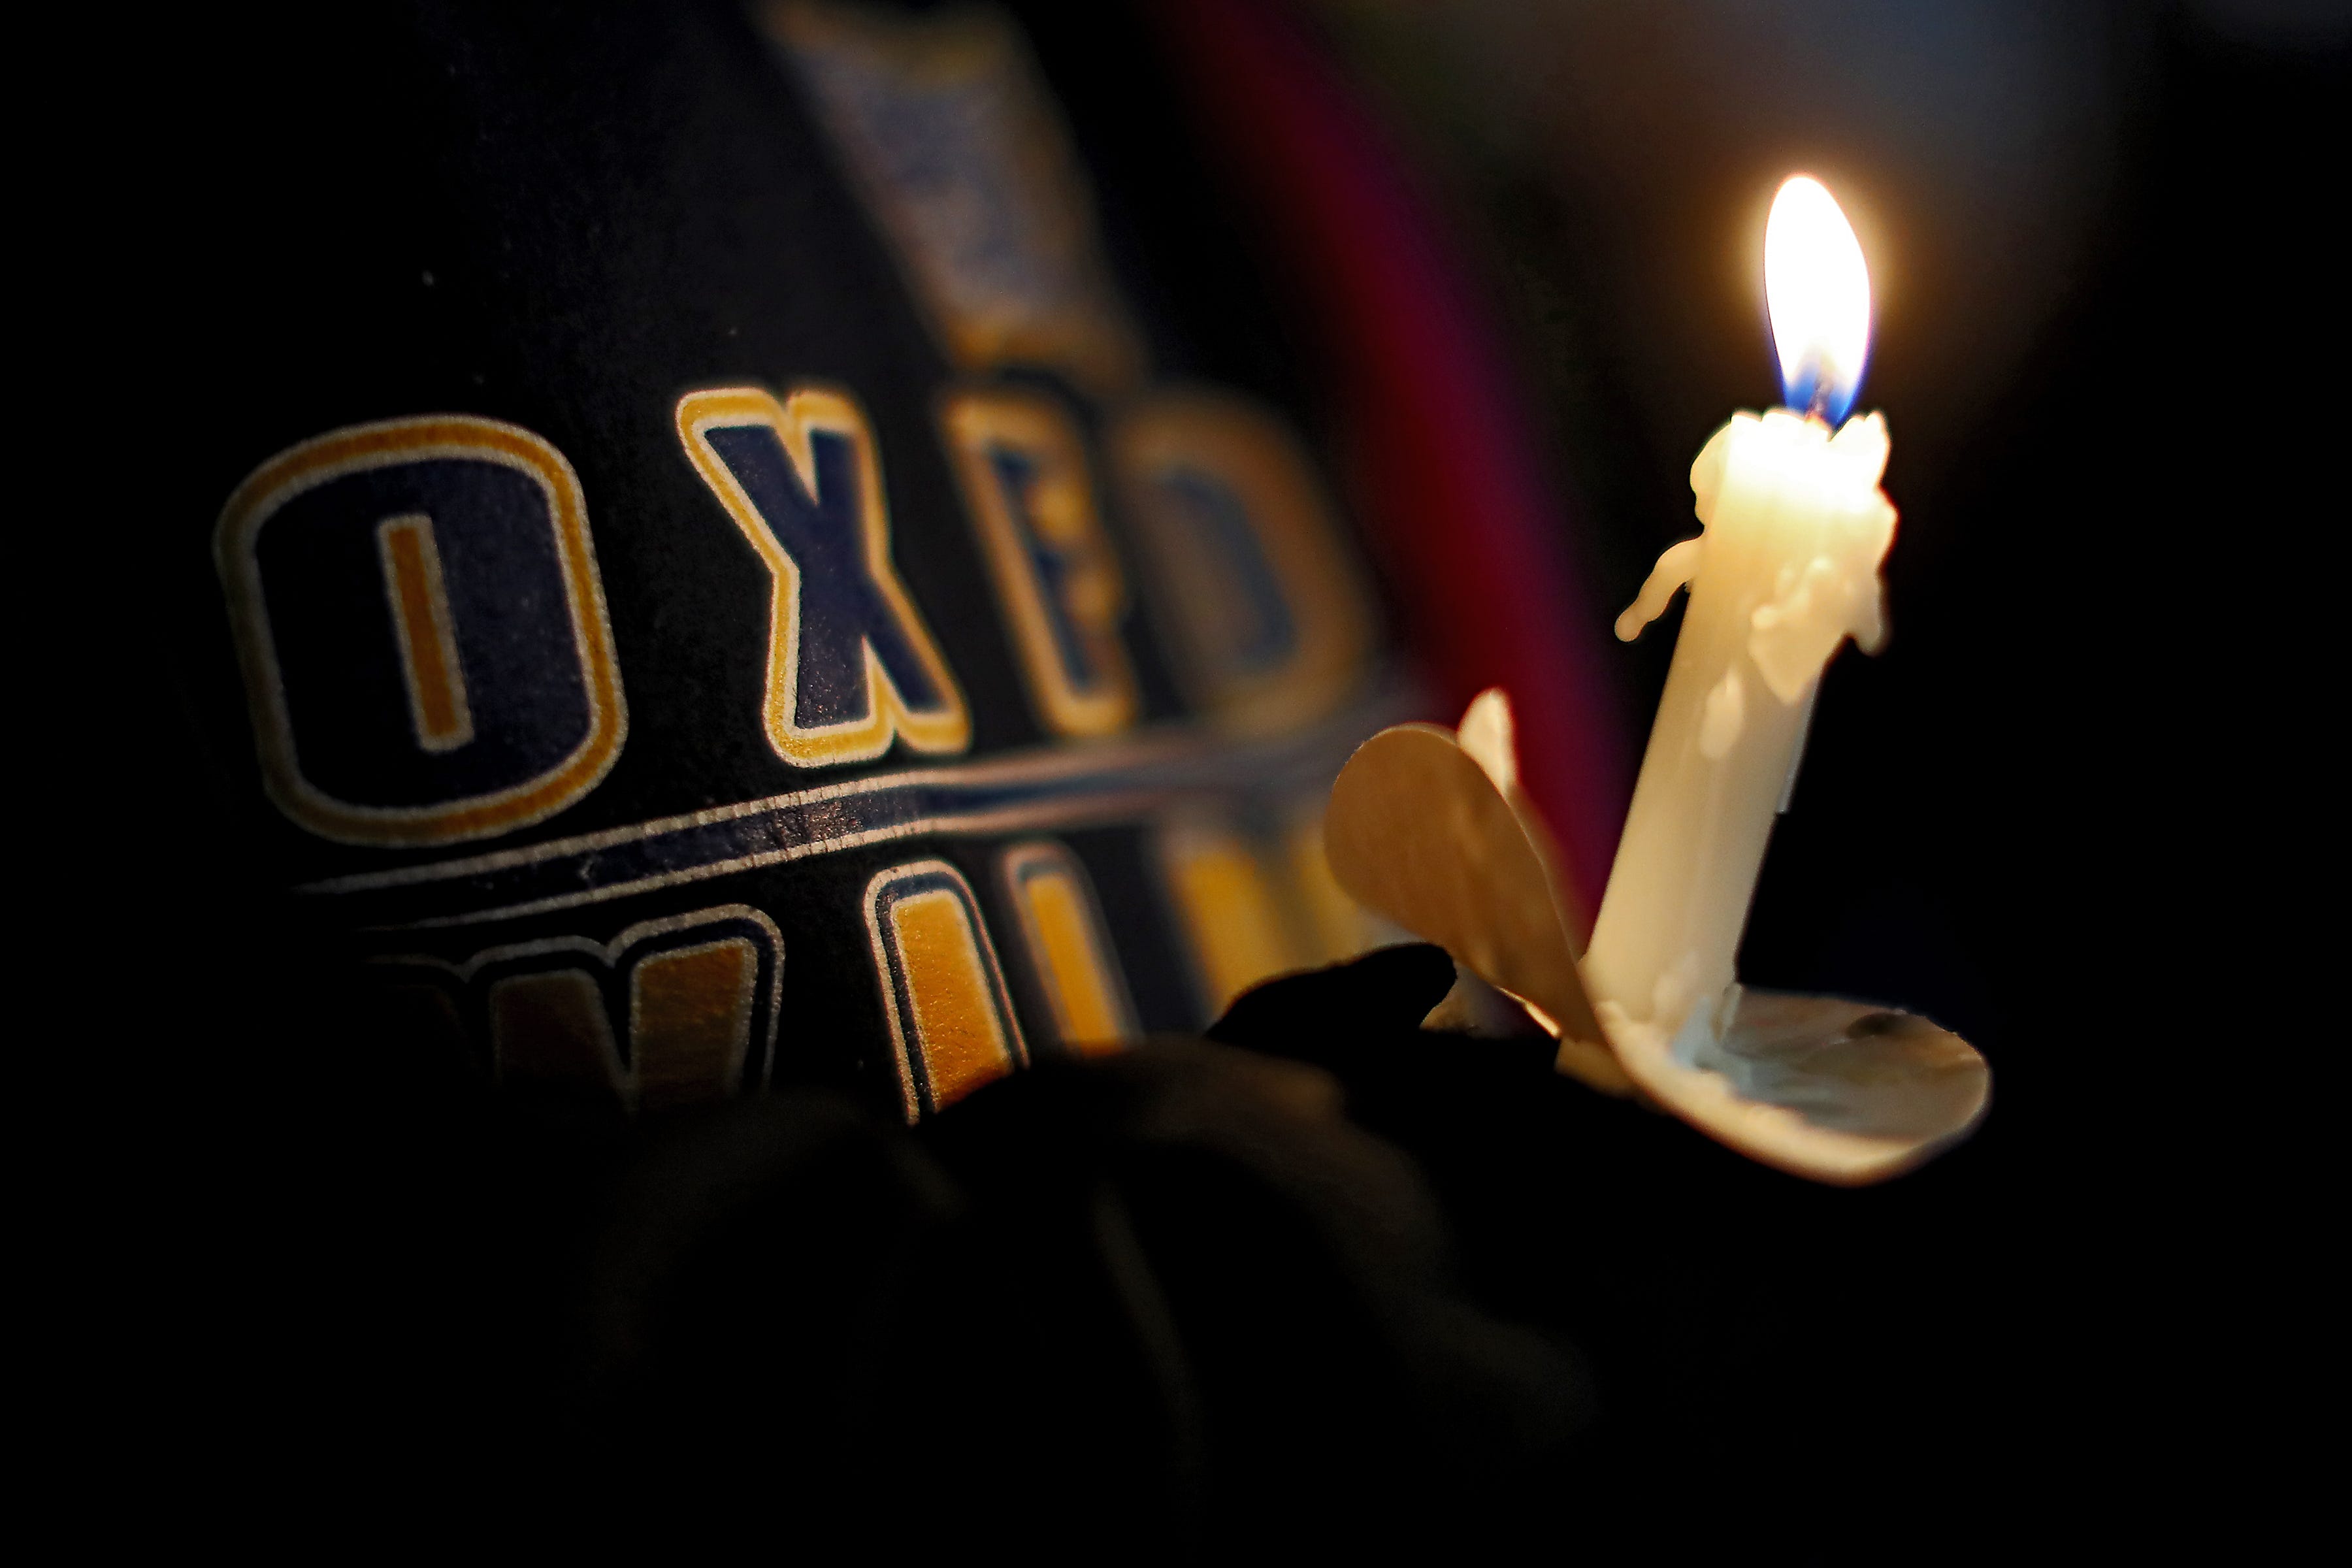 A young student takes part in a candlelight vigil on Friday, Dec. 3, 2021 in downtown Oxford.